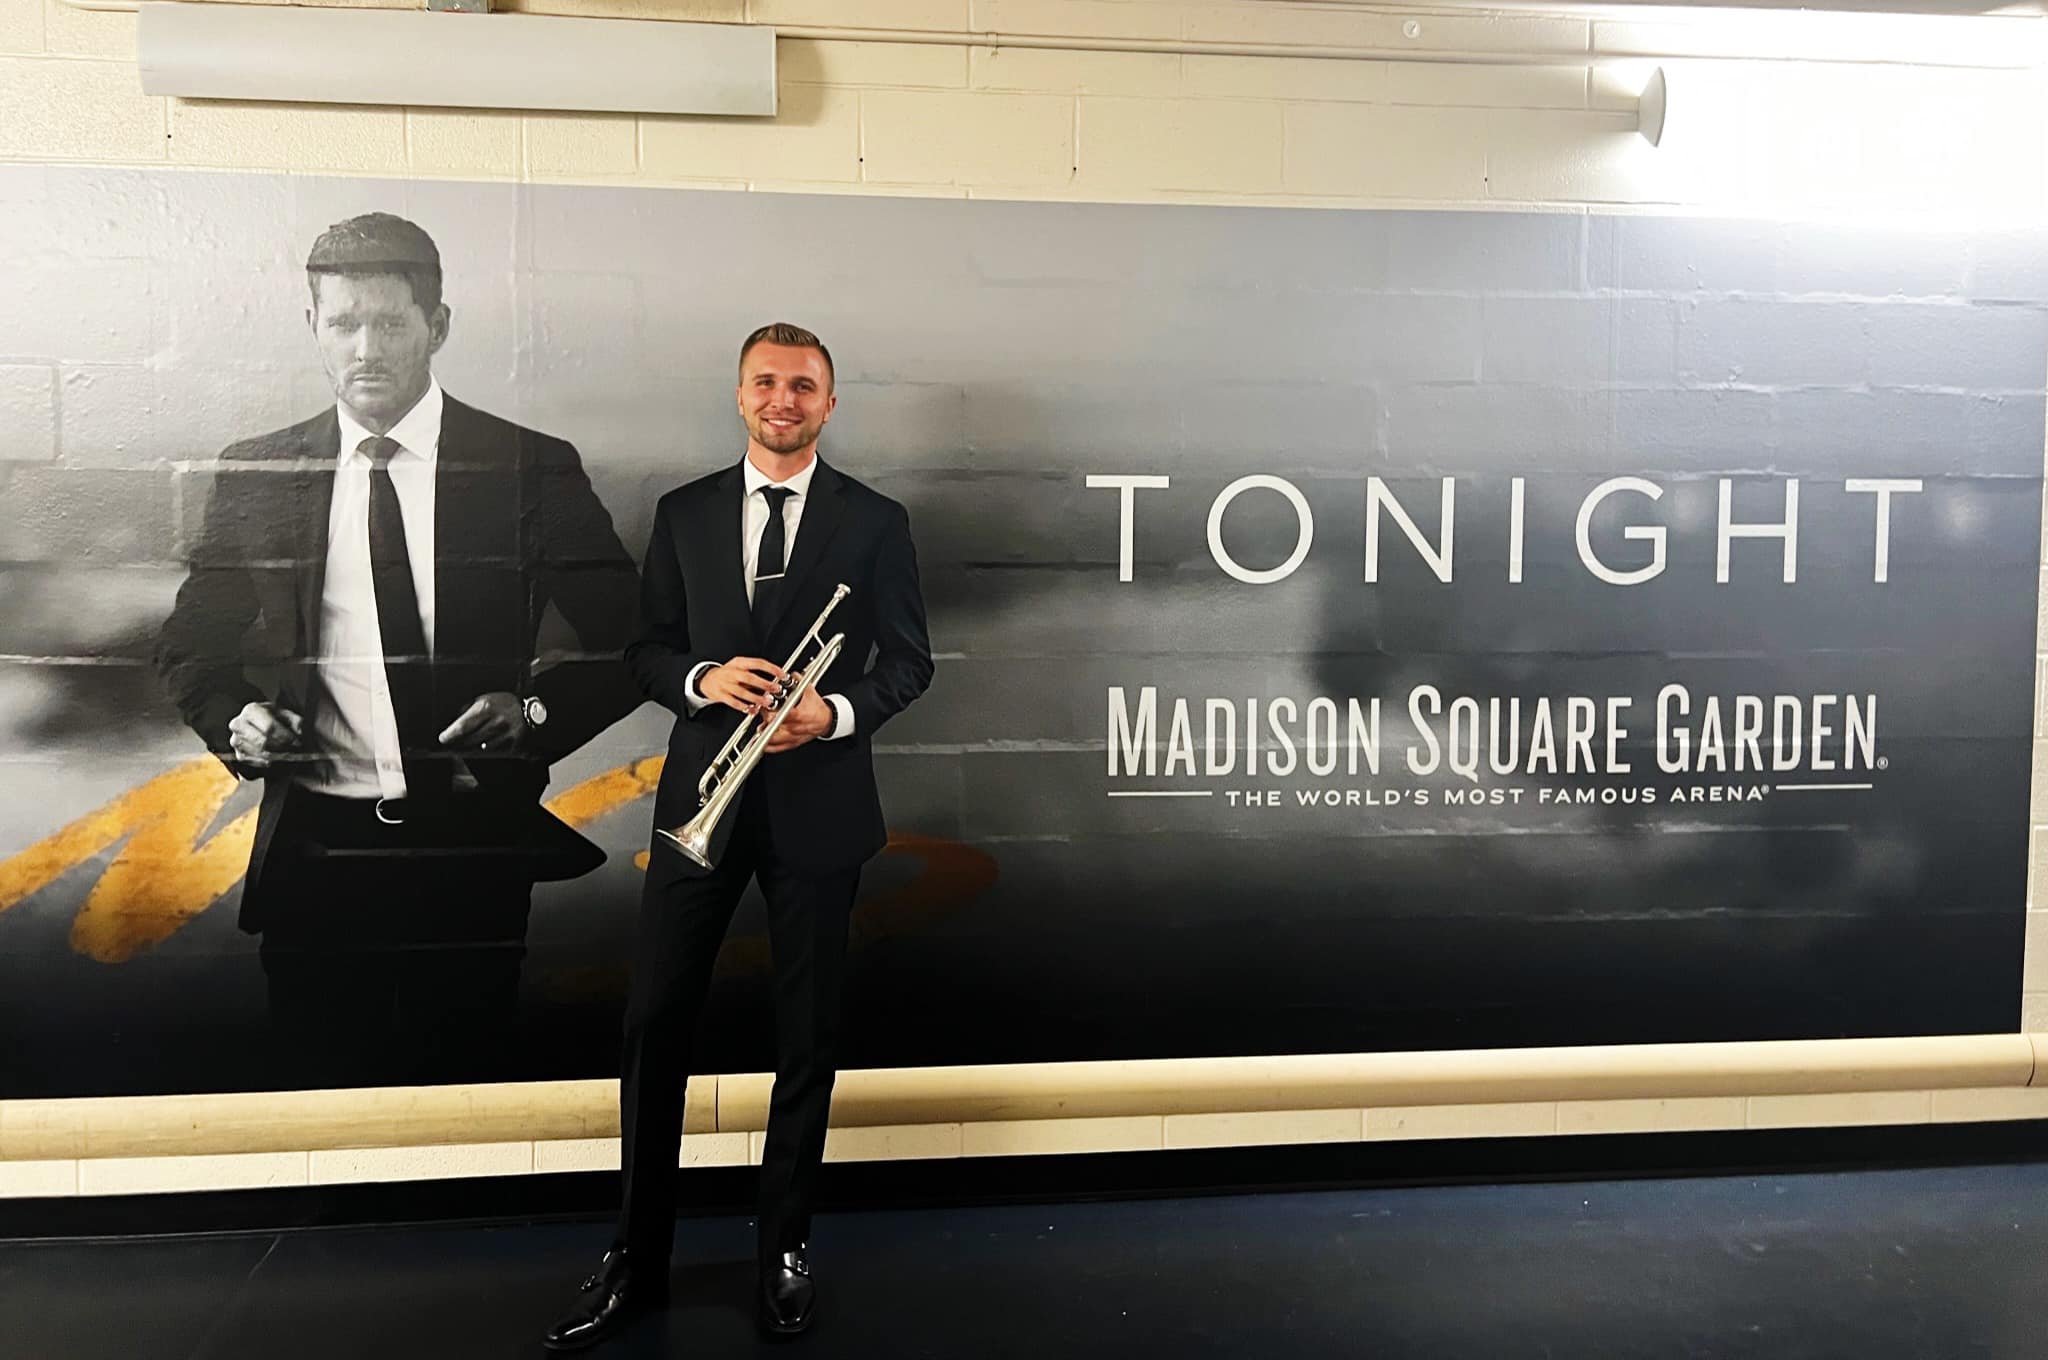 Photo of Zachary Finnegan, 2018 UWSP alumnus, who performed on trumpet at Madison Square Garden recently as a member of singer Michael Bublé’'s band.